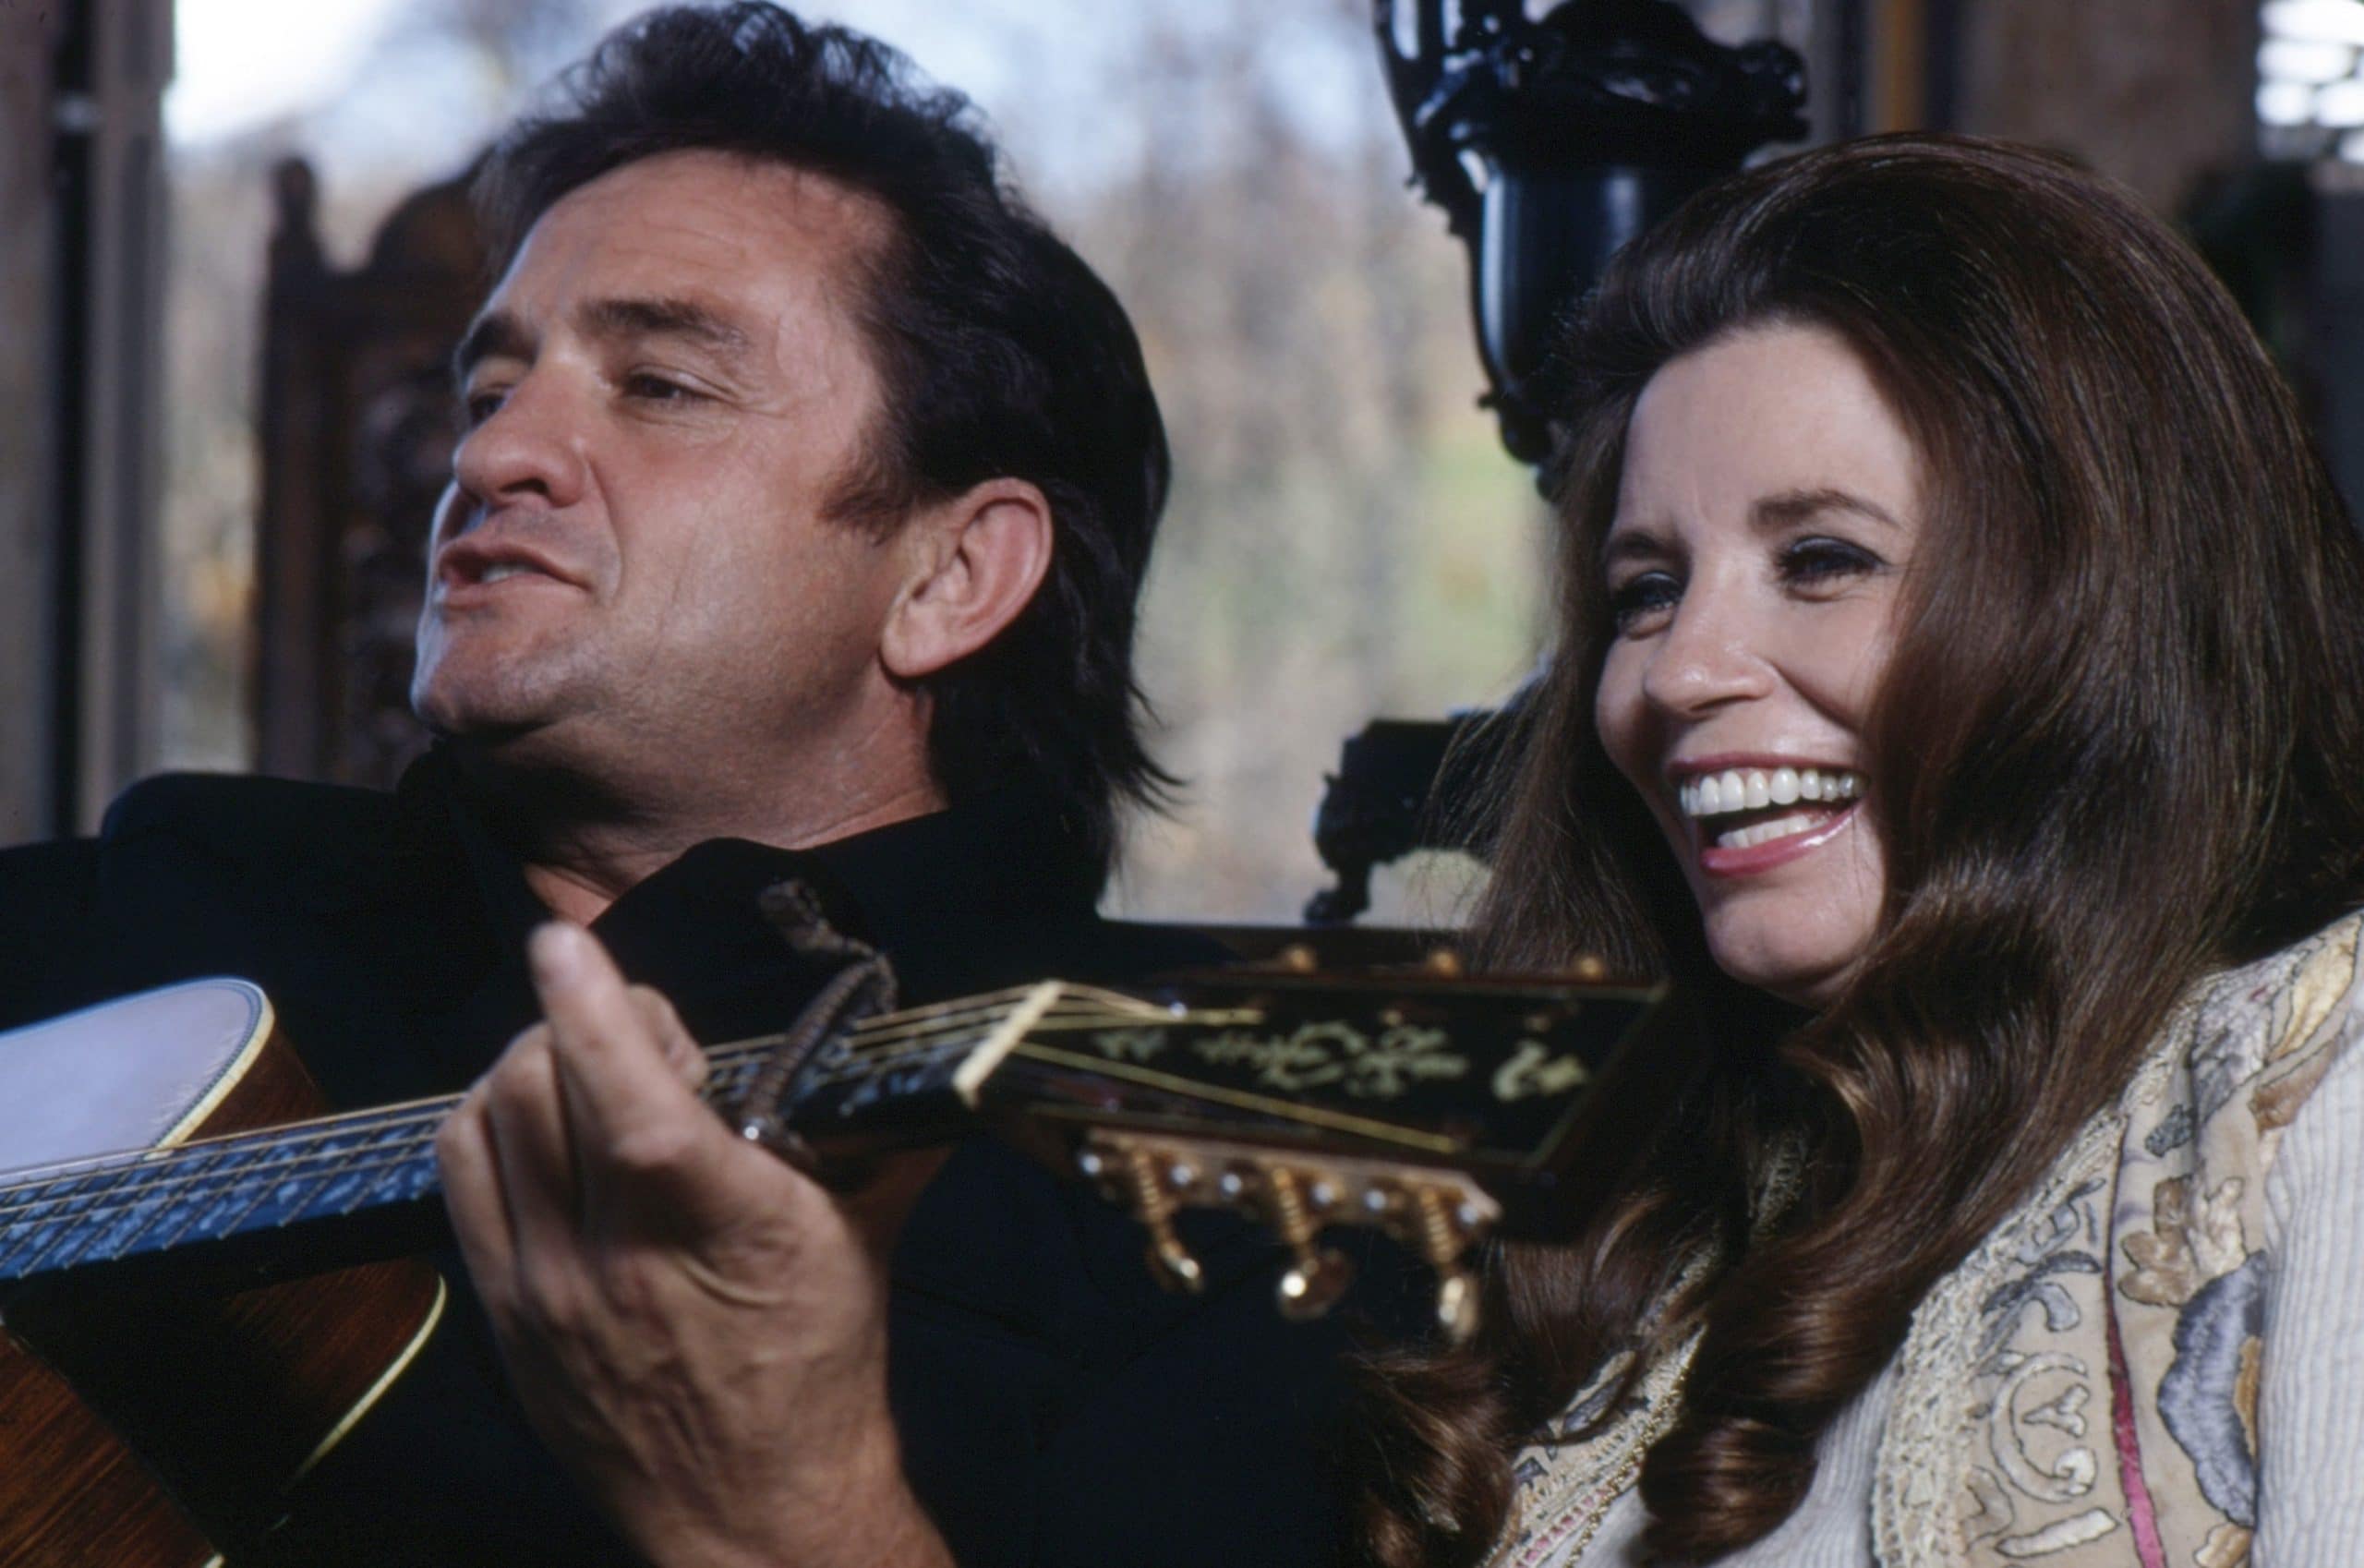 From left: Johnny Cash, June Carter Cash, at home in Hendersonville, TN, circa 1970